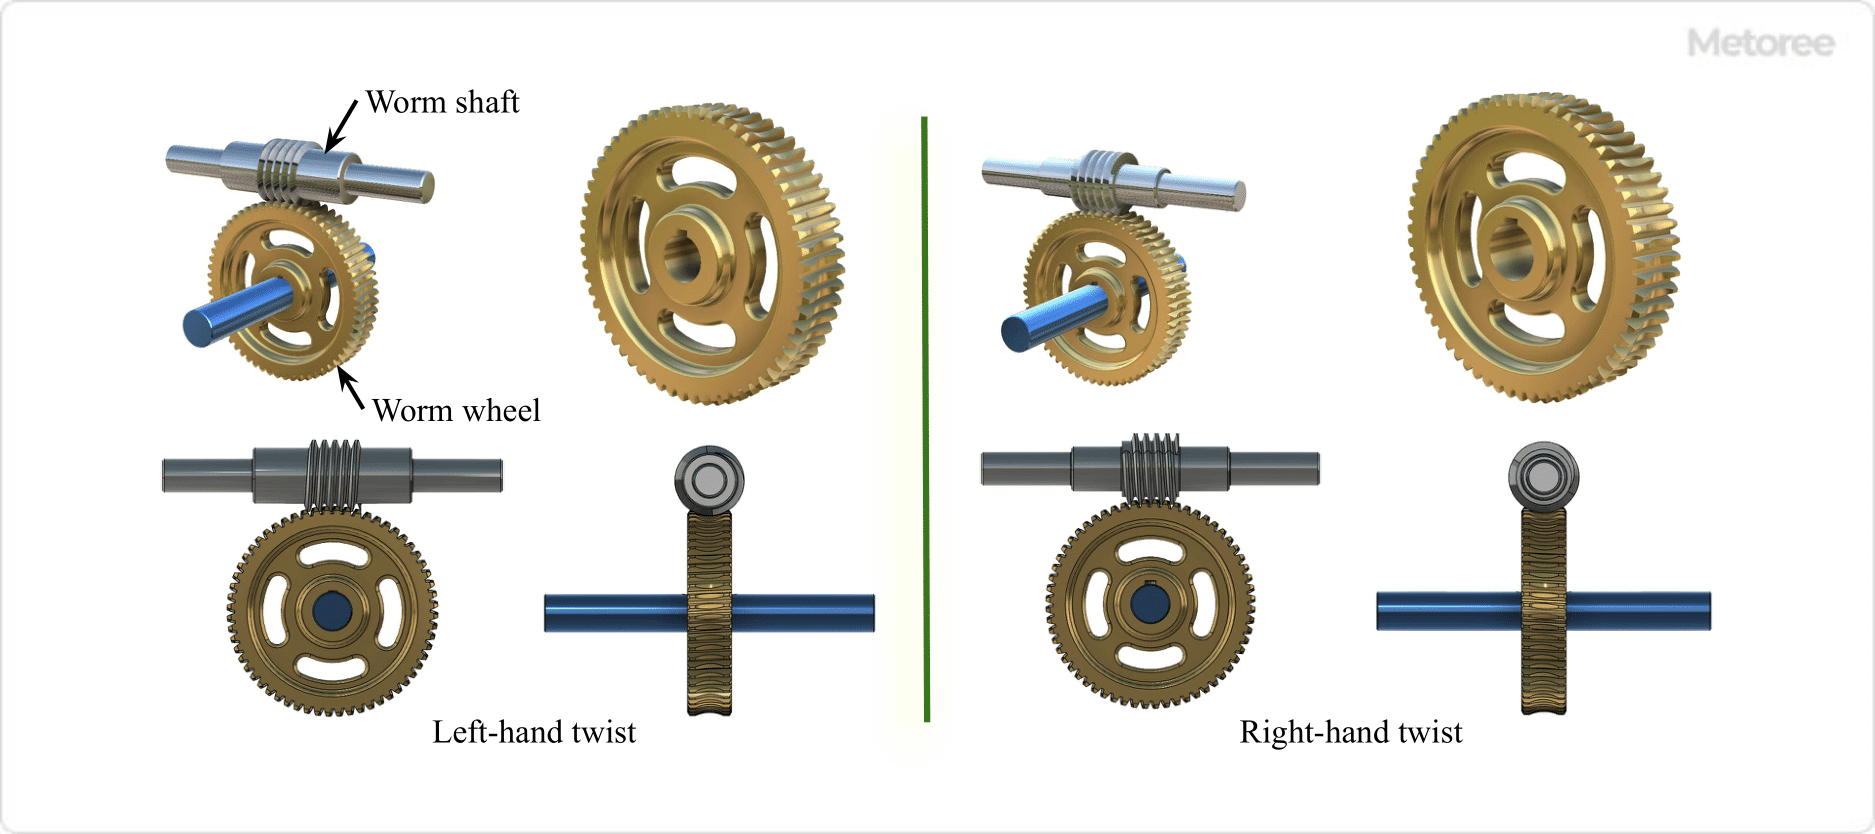 Figure 1. Structure of worm gear